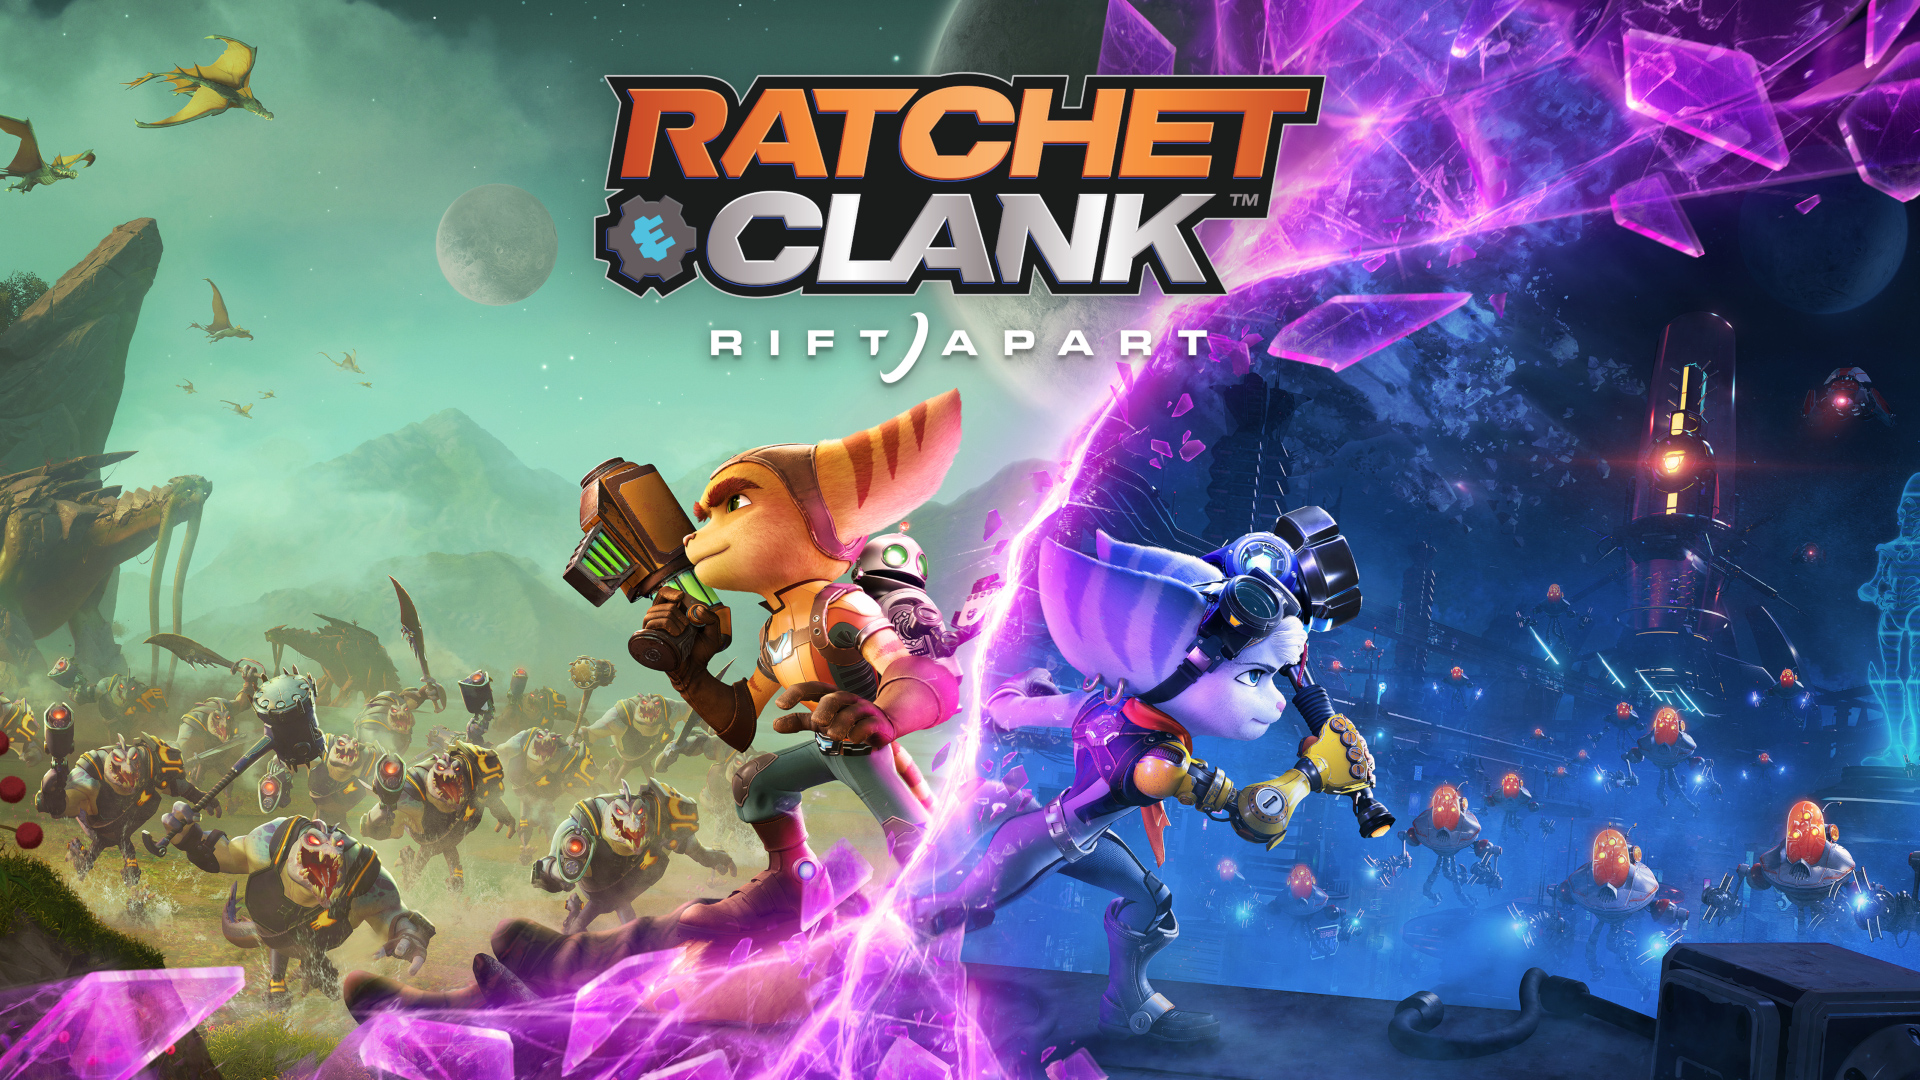 The Ratchet & Clank Collection Going 1080p on PS3, Multiplayer Included –  PlayStation.Blog